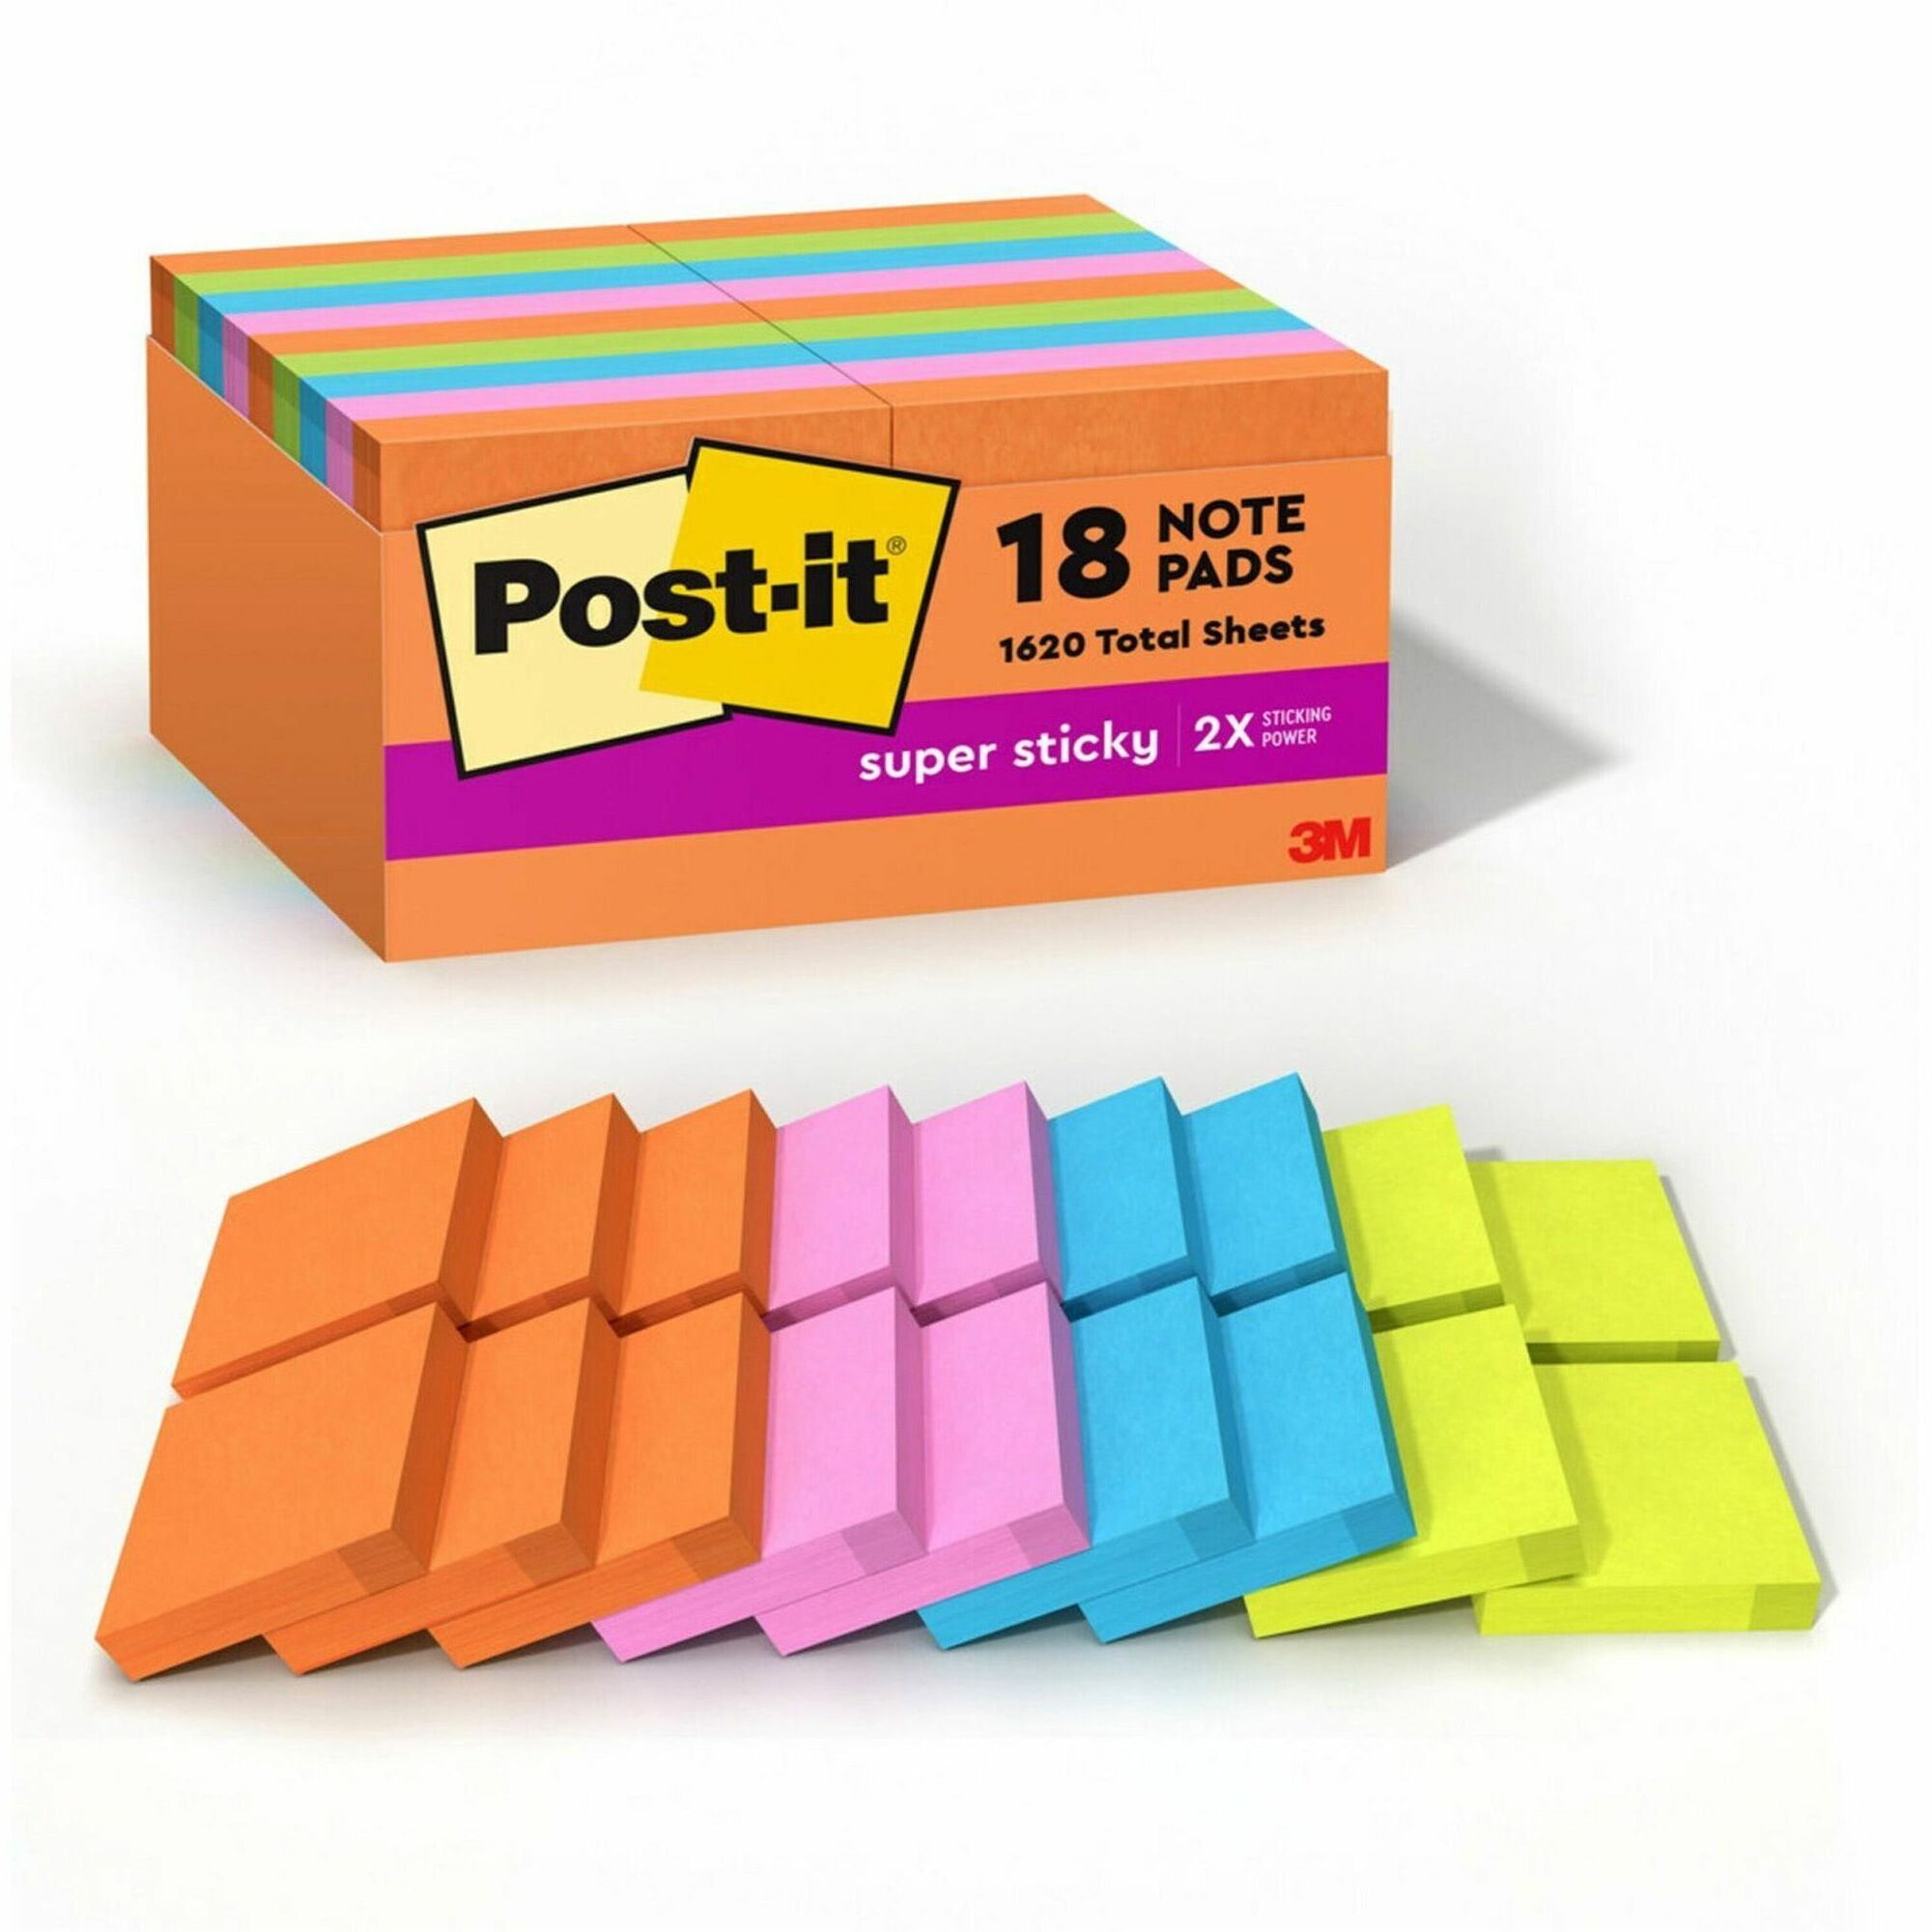 post-it-super-sticky-notes-energy-boost-color-collection-2-x-2-square-90-sheets-per-pad-multicolor-paper-super-sticky-adhesive-recyclable-residue-free-1620-pack_mmm62218ssauc - 1